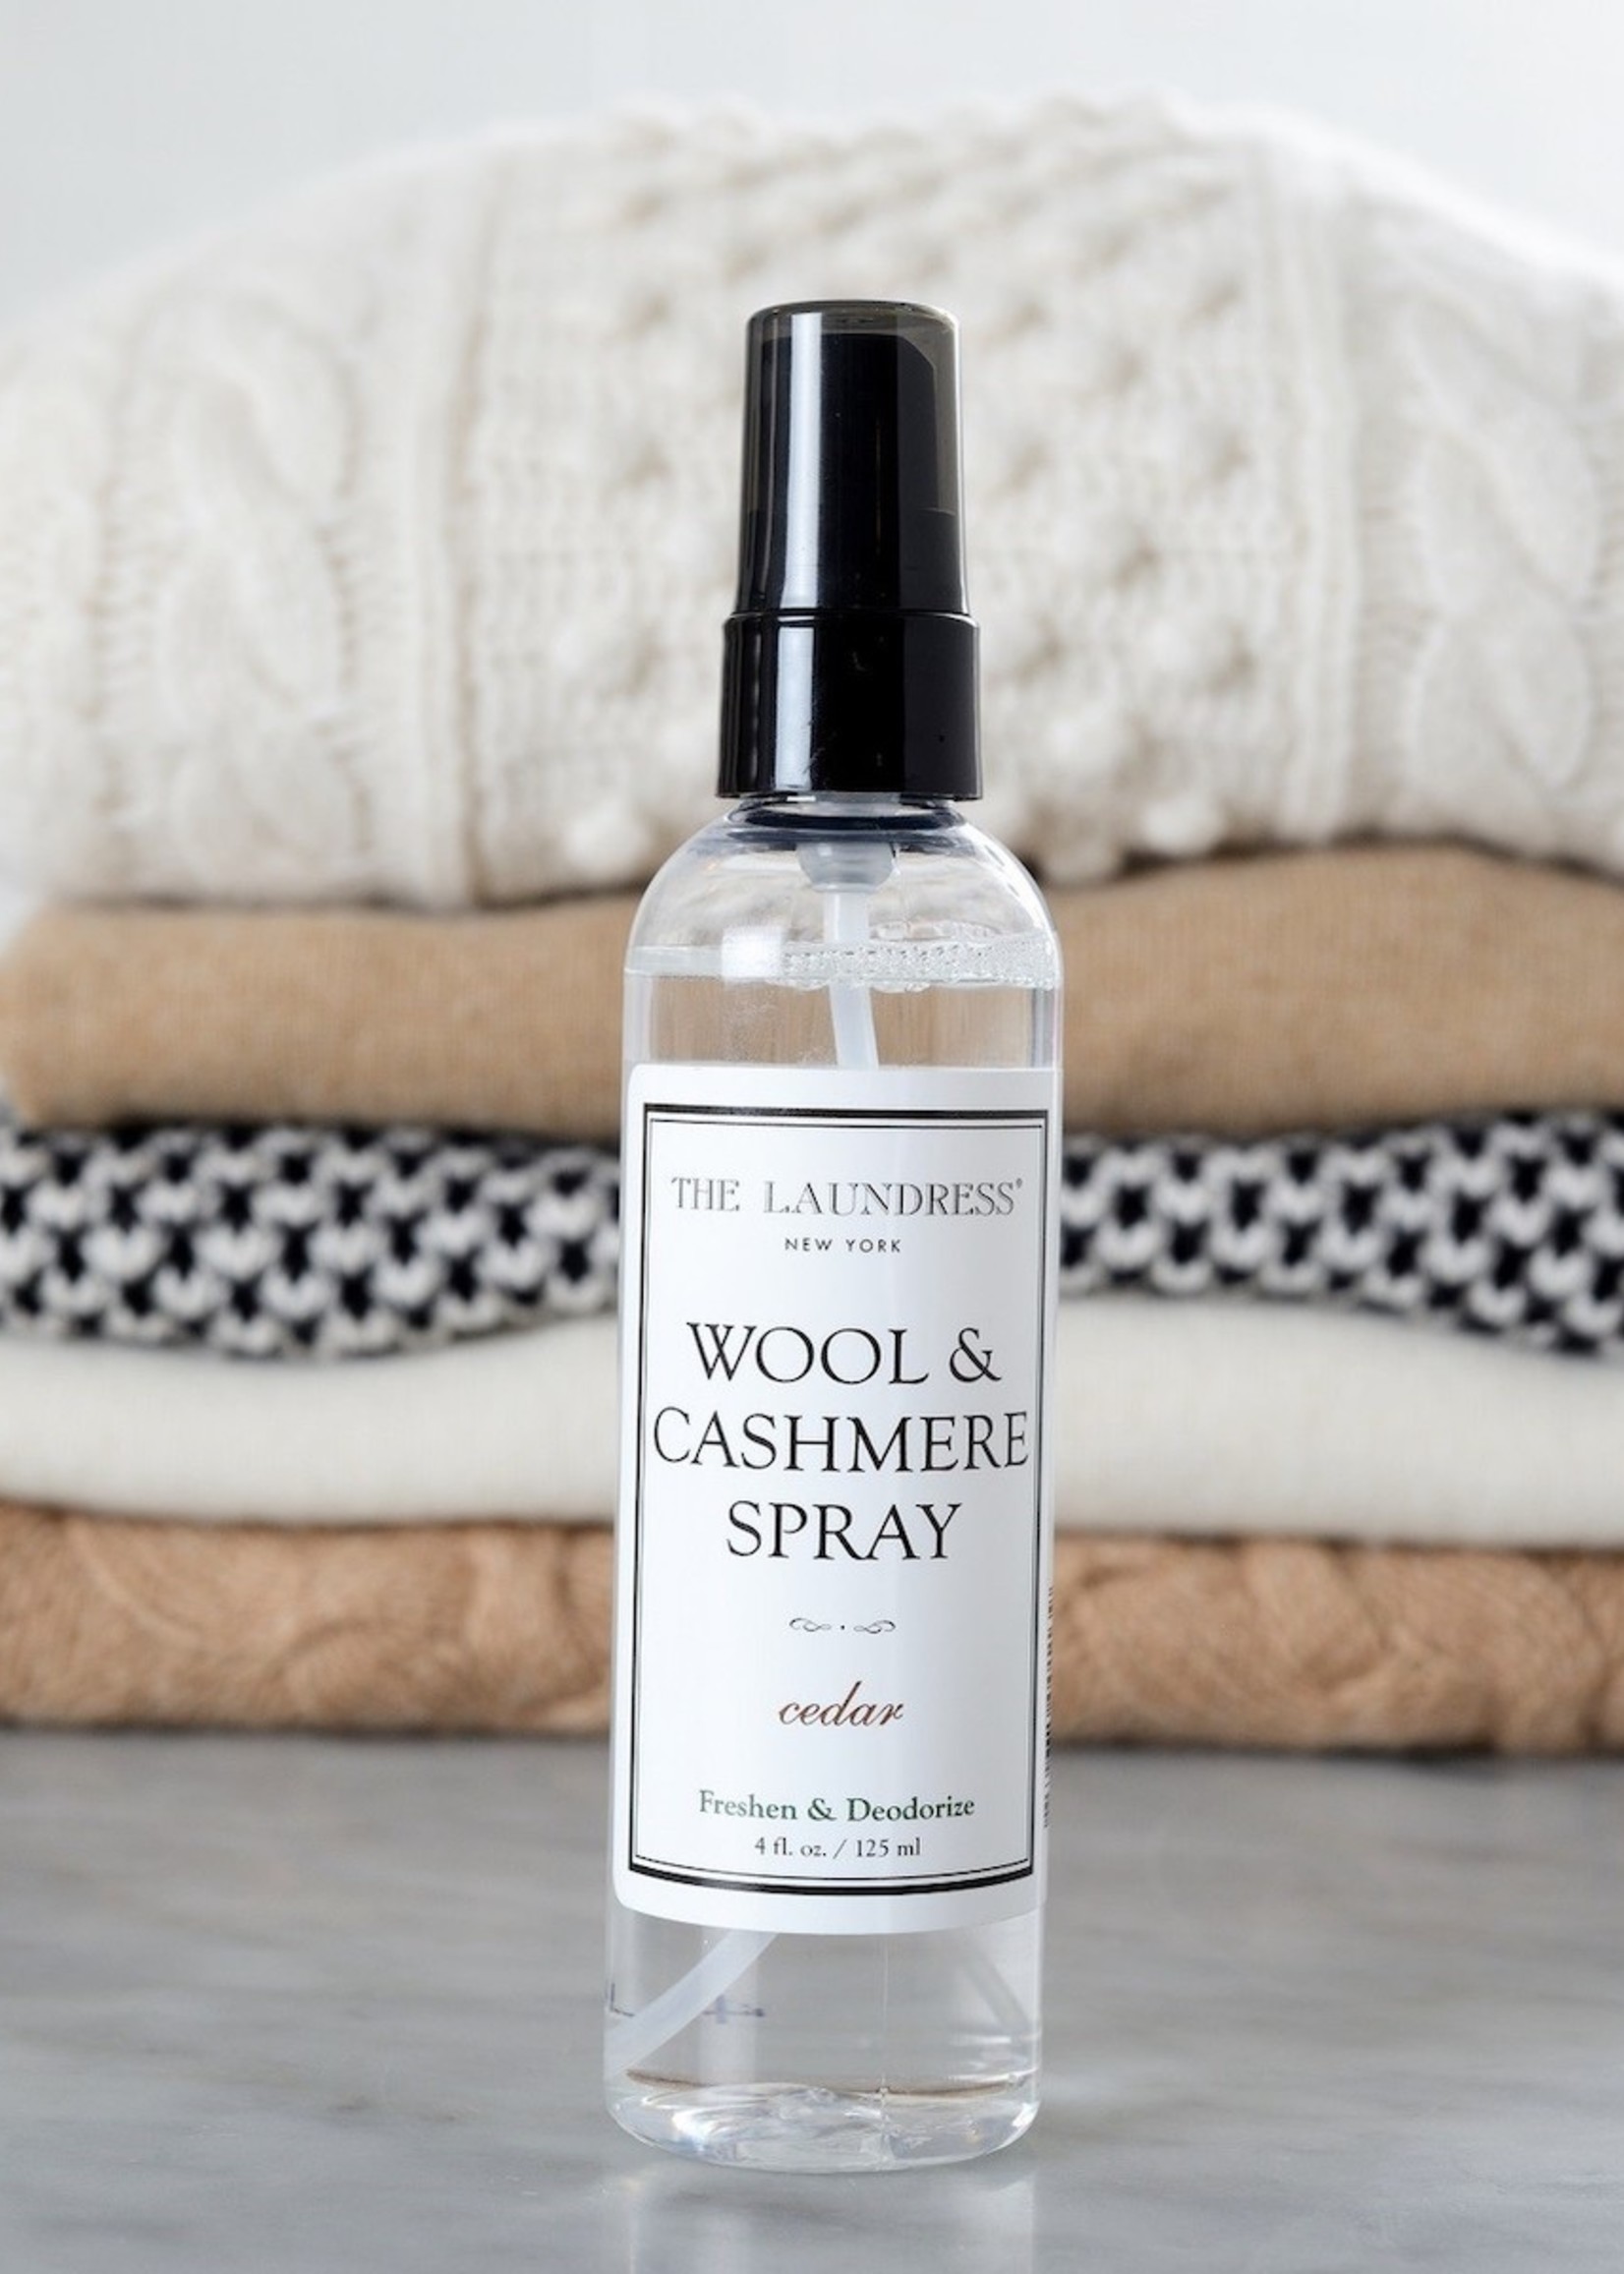 The Laundress New York Wool & Cashmere Spray